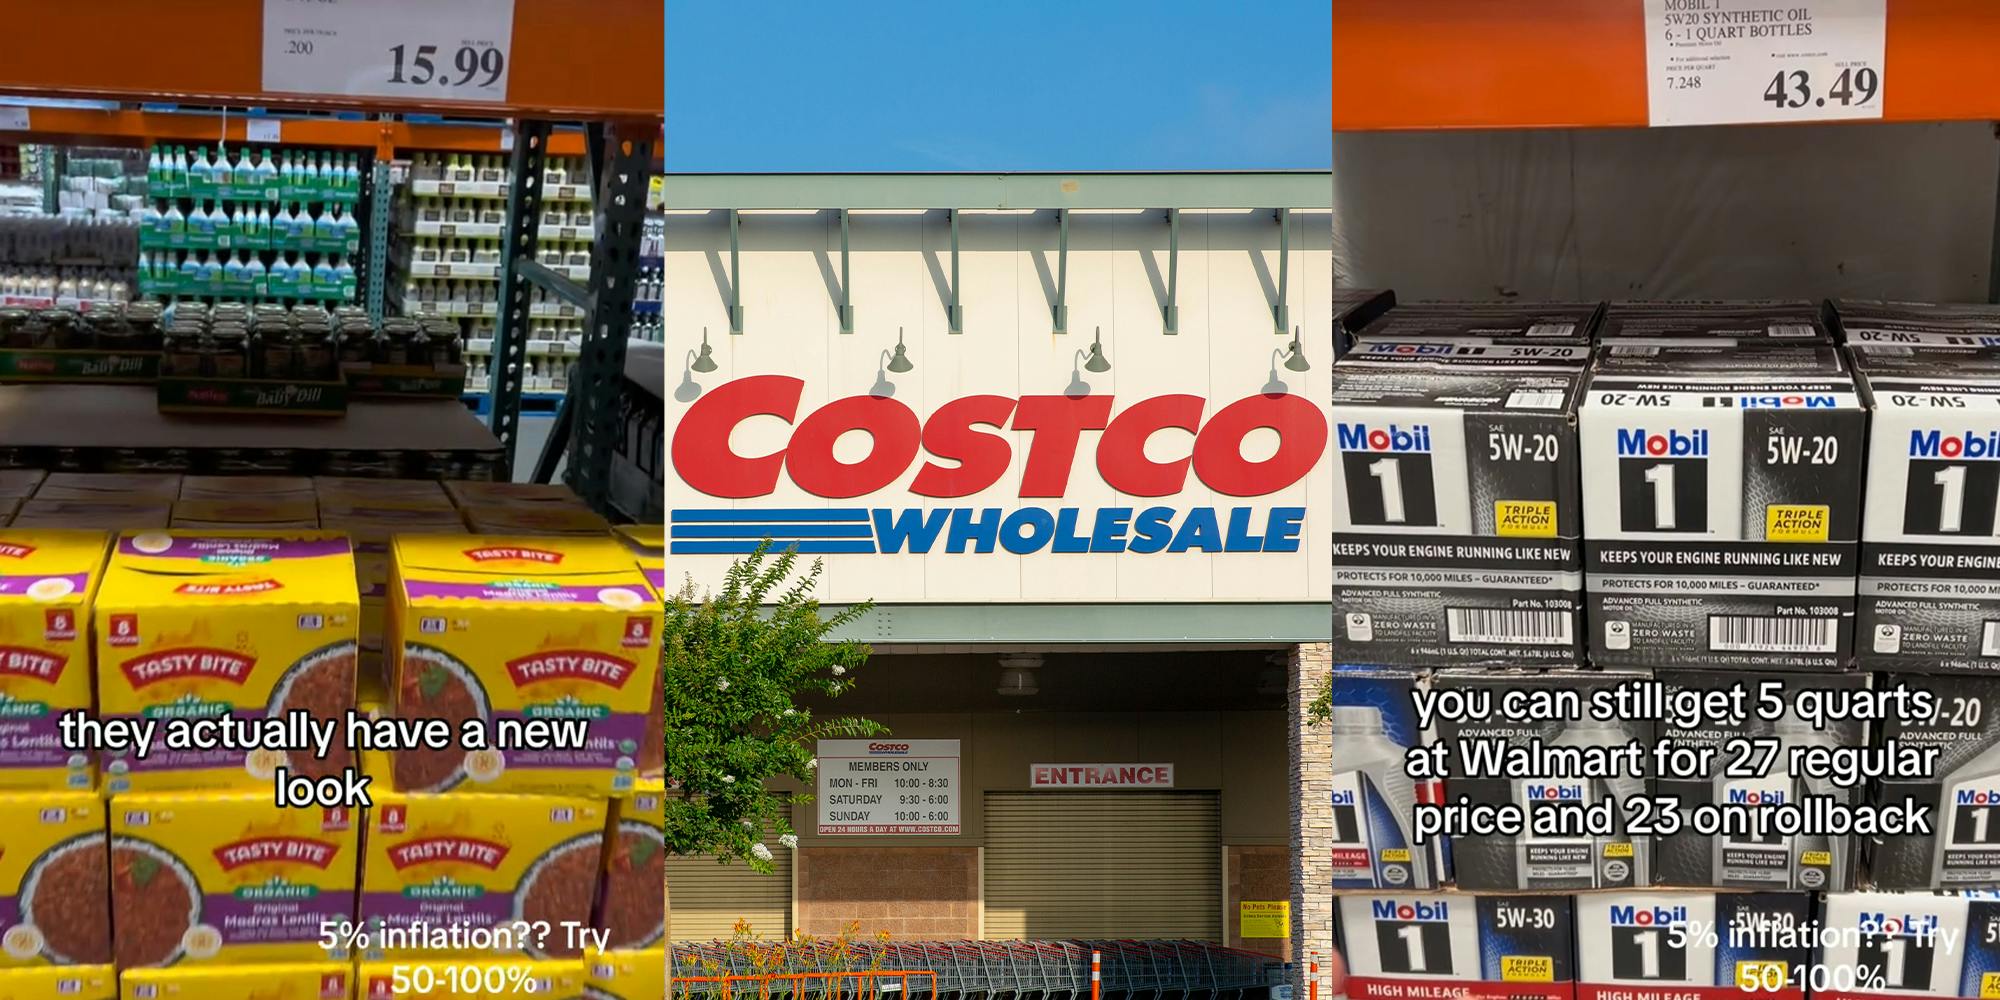 Shopper shares items he no longer buys at Costco due to inflation